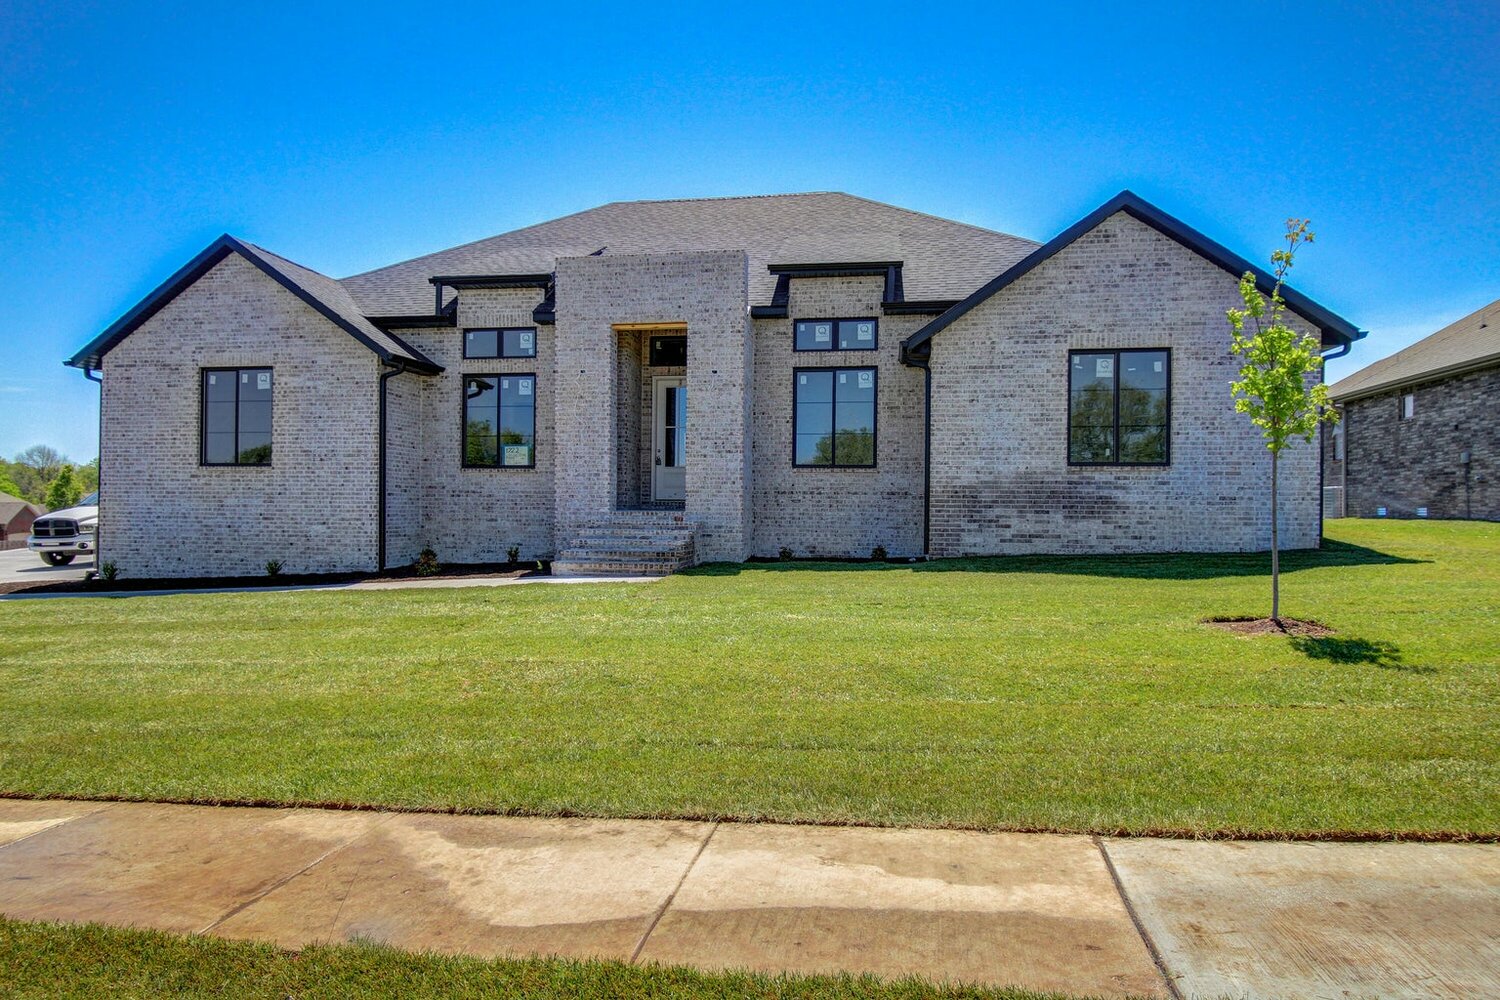 1722 Waterstone Ave.
$649,977
Bedrooms: 4
Bathrooms: 4
Listing firm: Alpha Realty MO LLC